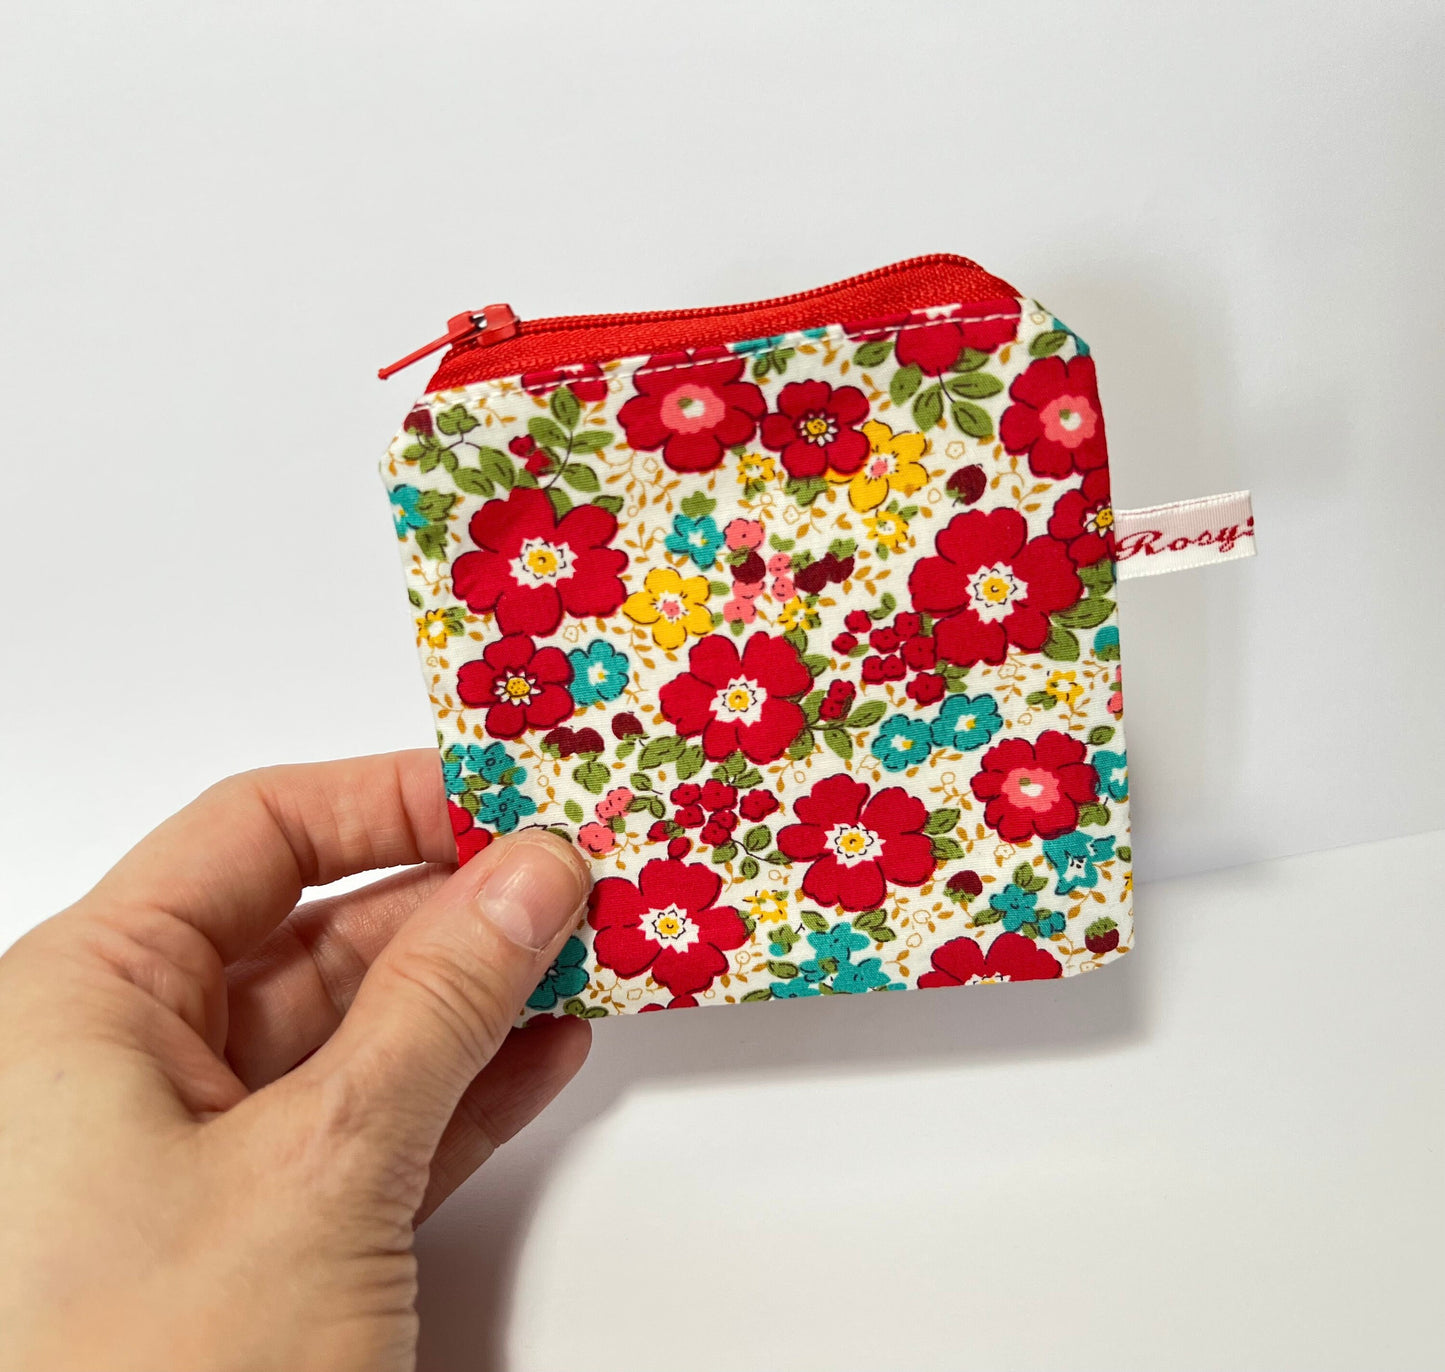 Spanish Floral Print Mini Notions Case for Knitters' Stitch Markers